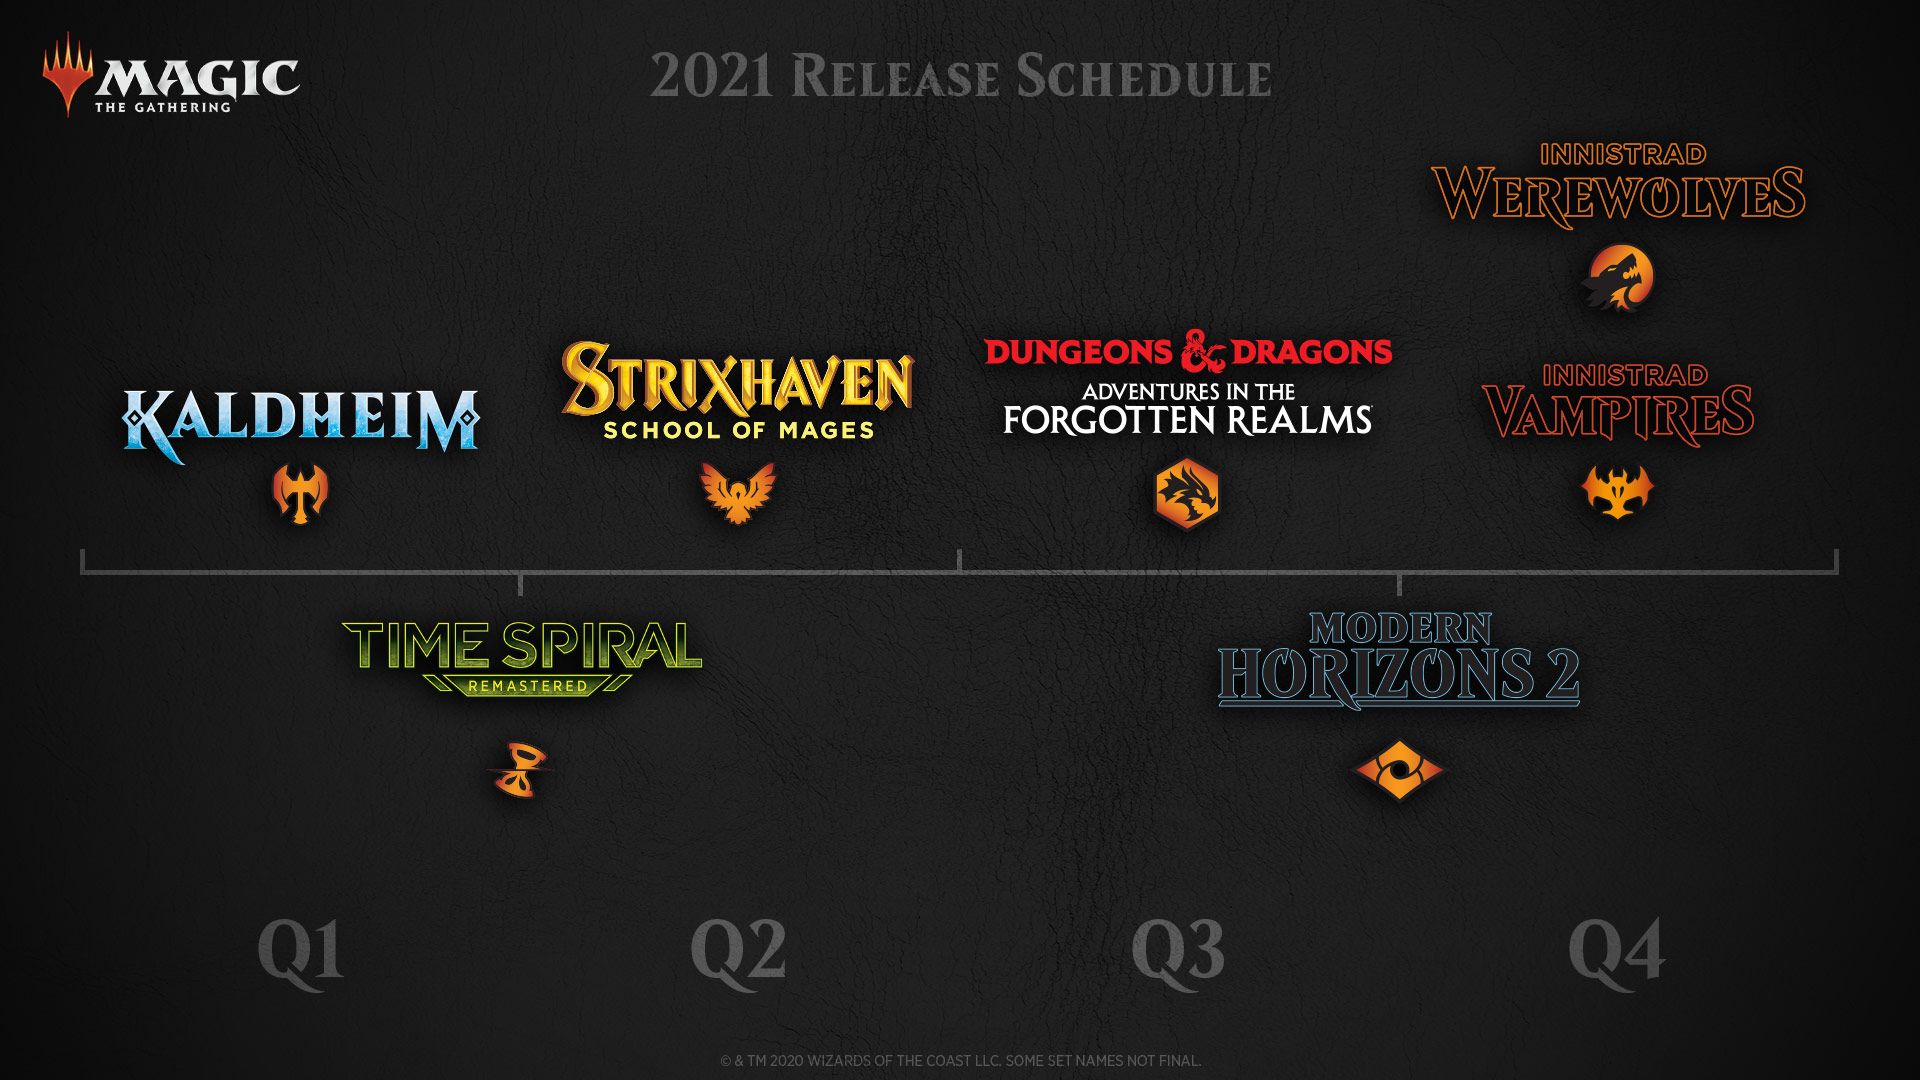 Magic: The Gathering 2021 Release Timeline